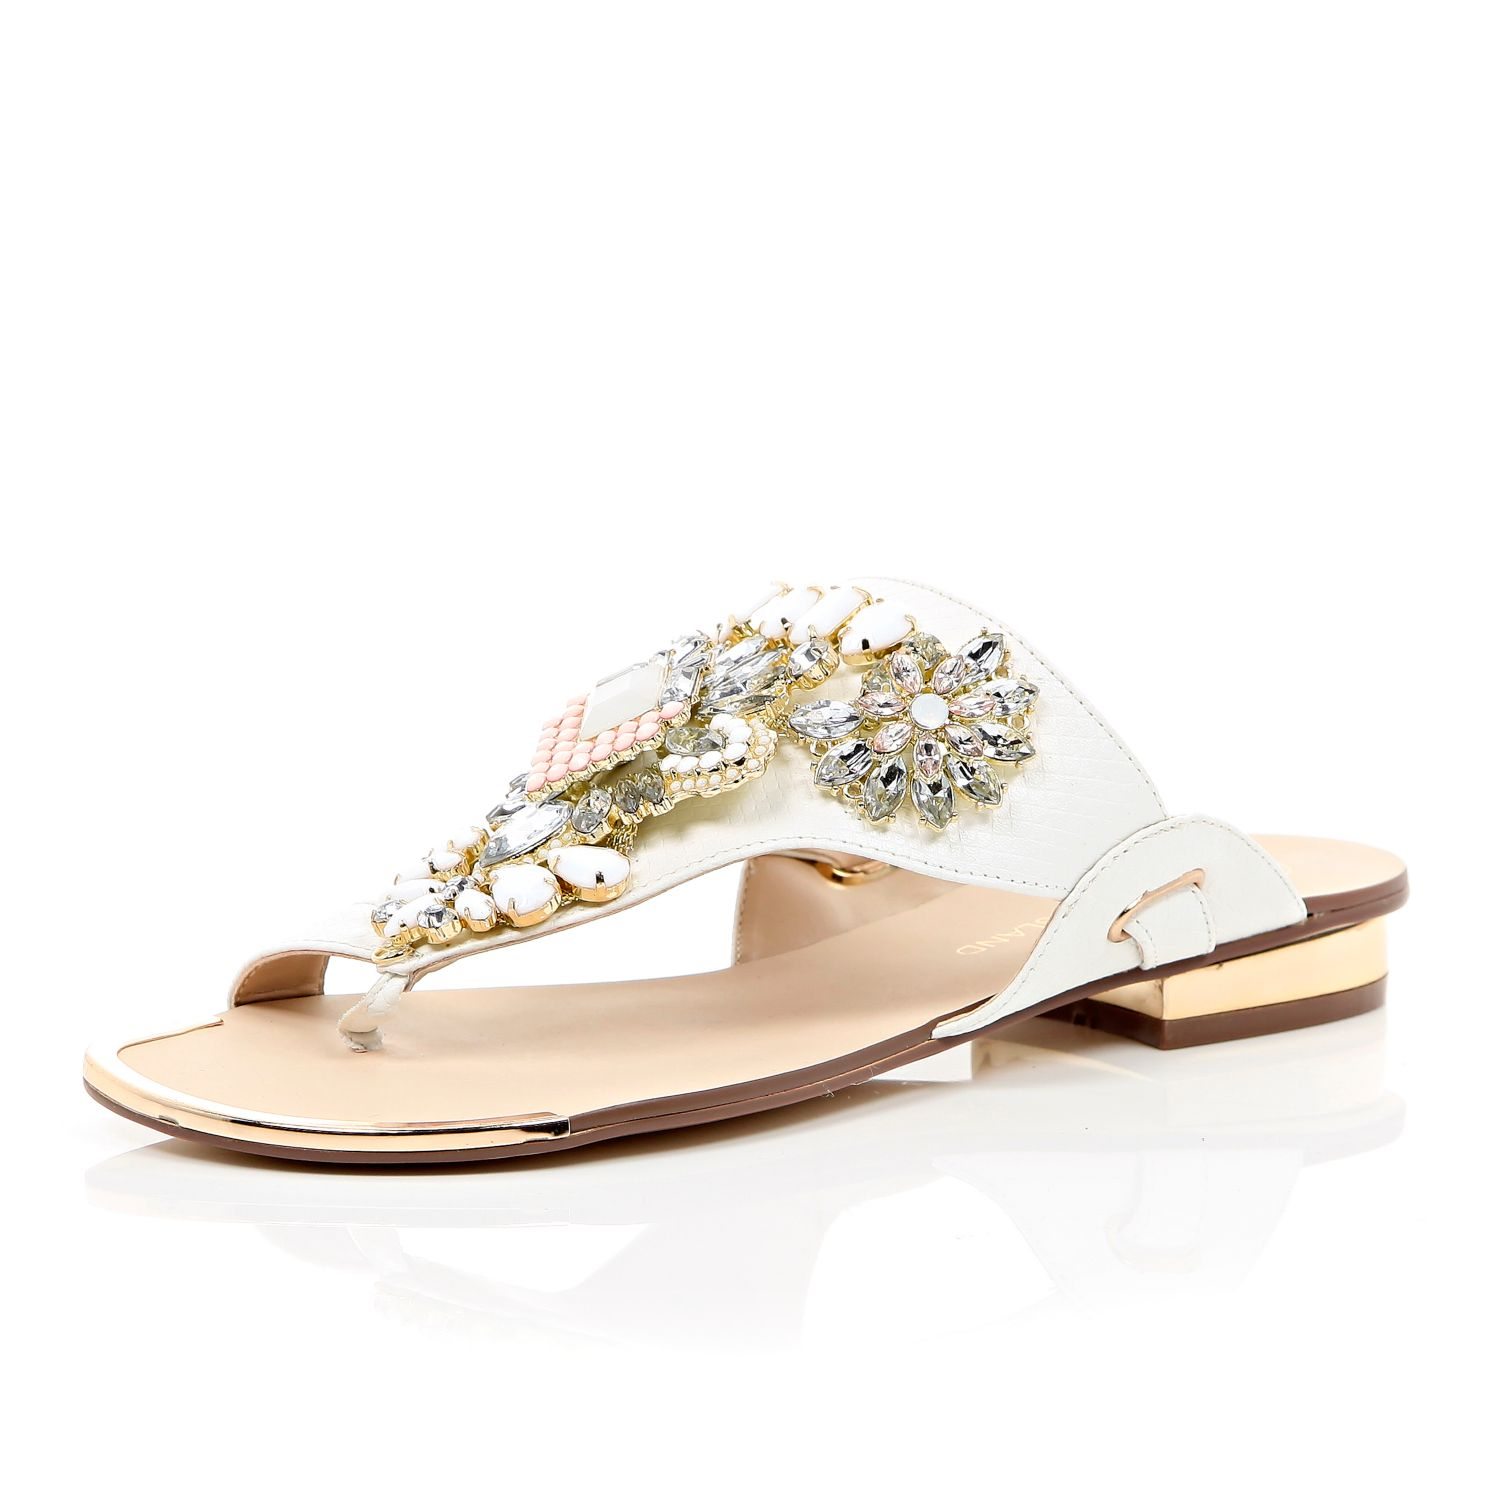 River Island White Heavily Embellished Sandals in White | Lyst